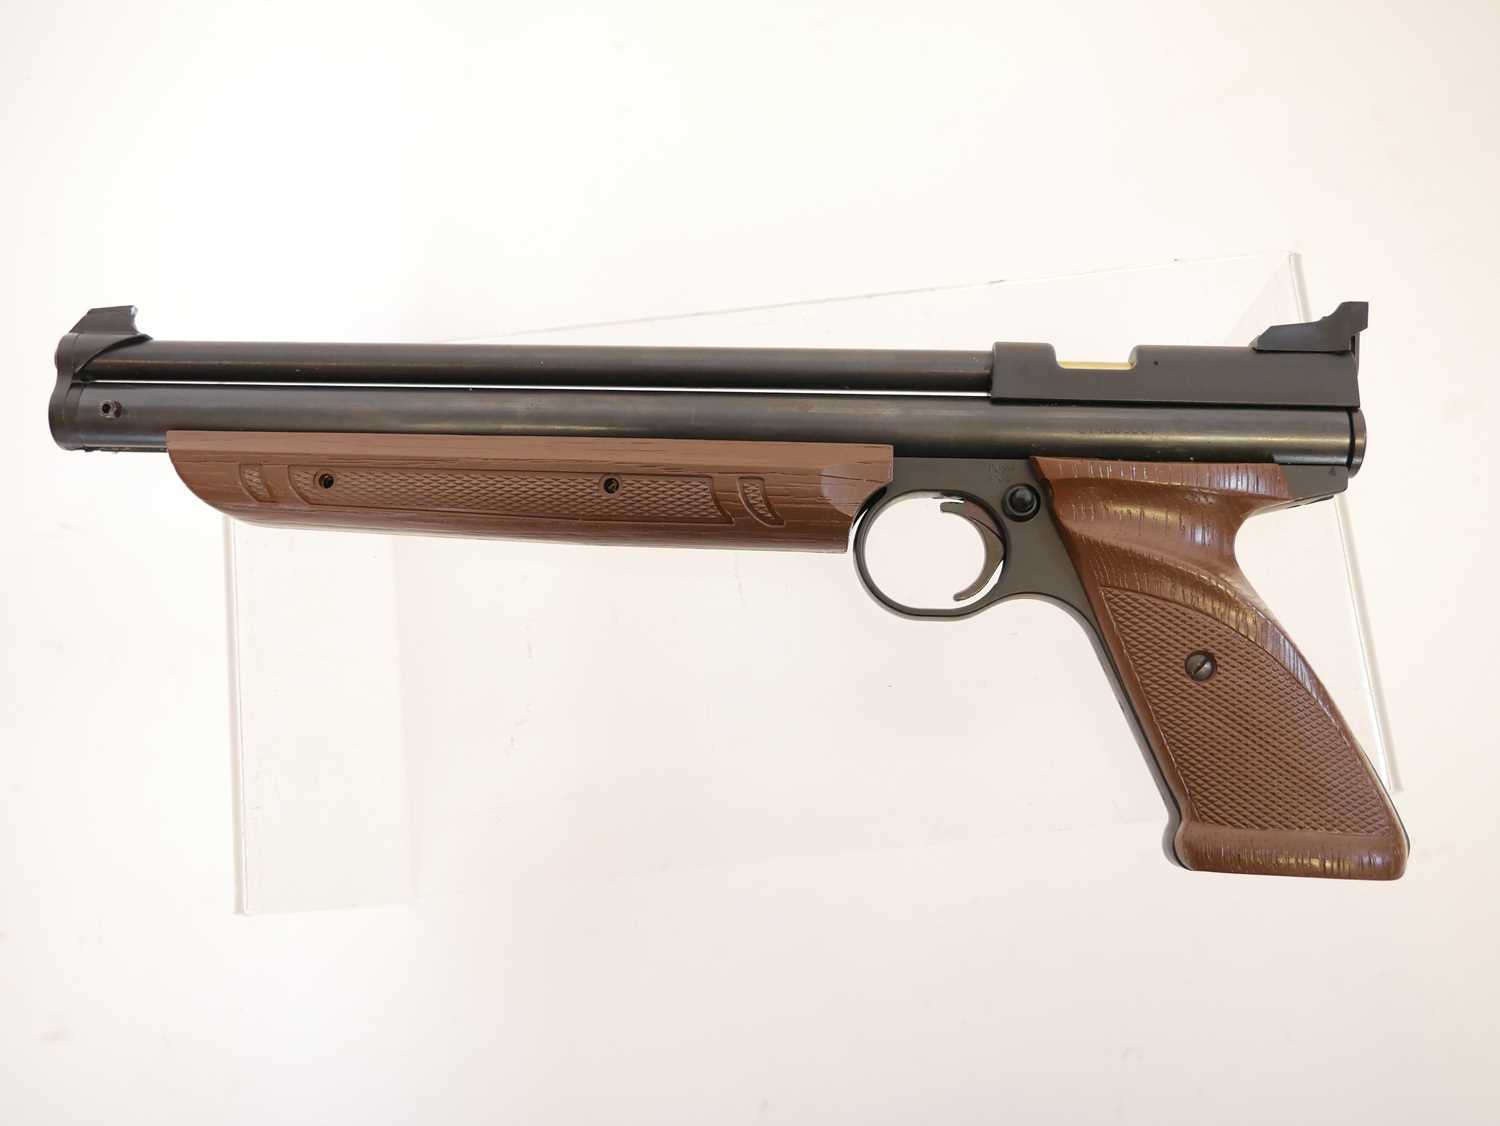 Crosman .177 model 1377 American Classic air pistol, serial number 314B03081. No licence required to - Image 4 of 7